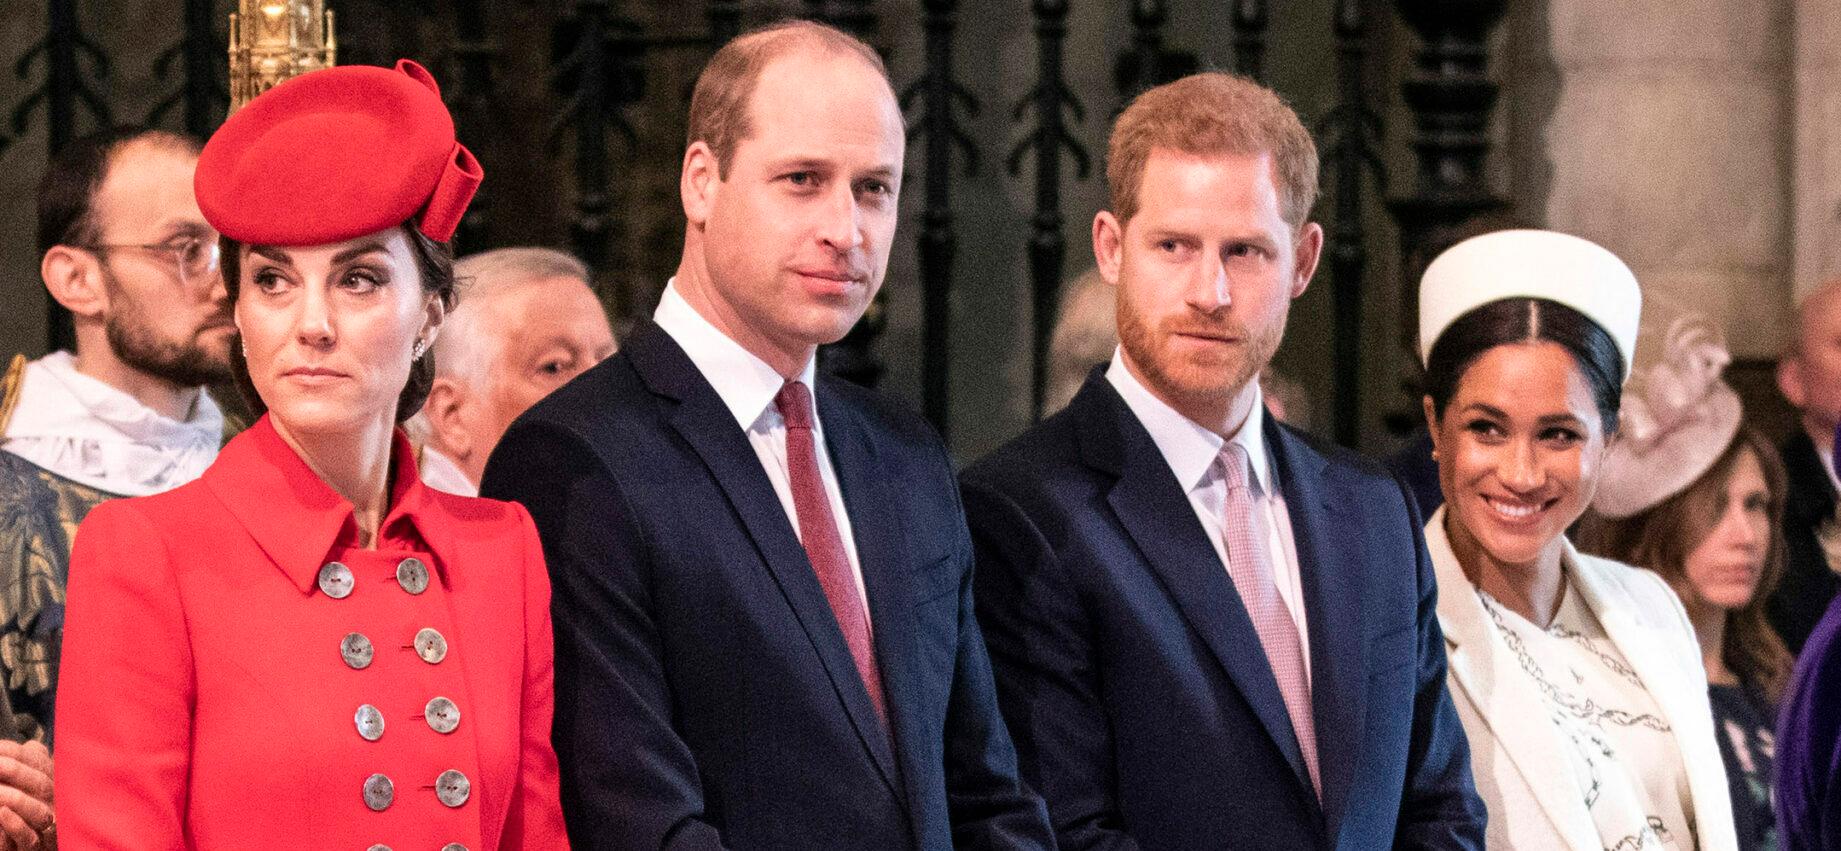 William And Kate Feel ‘Resentful’ Towards Harry And Meghan After Royal Exit